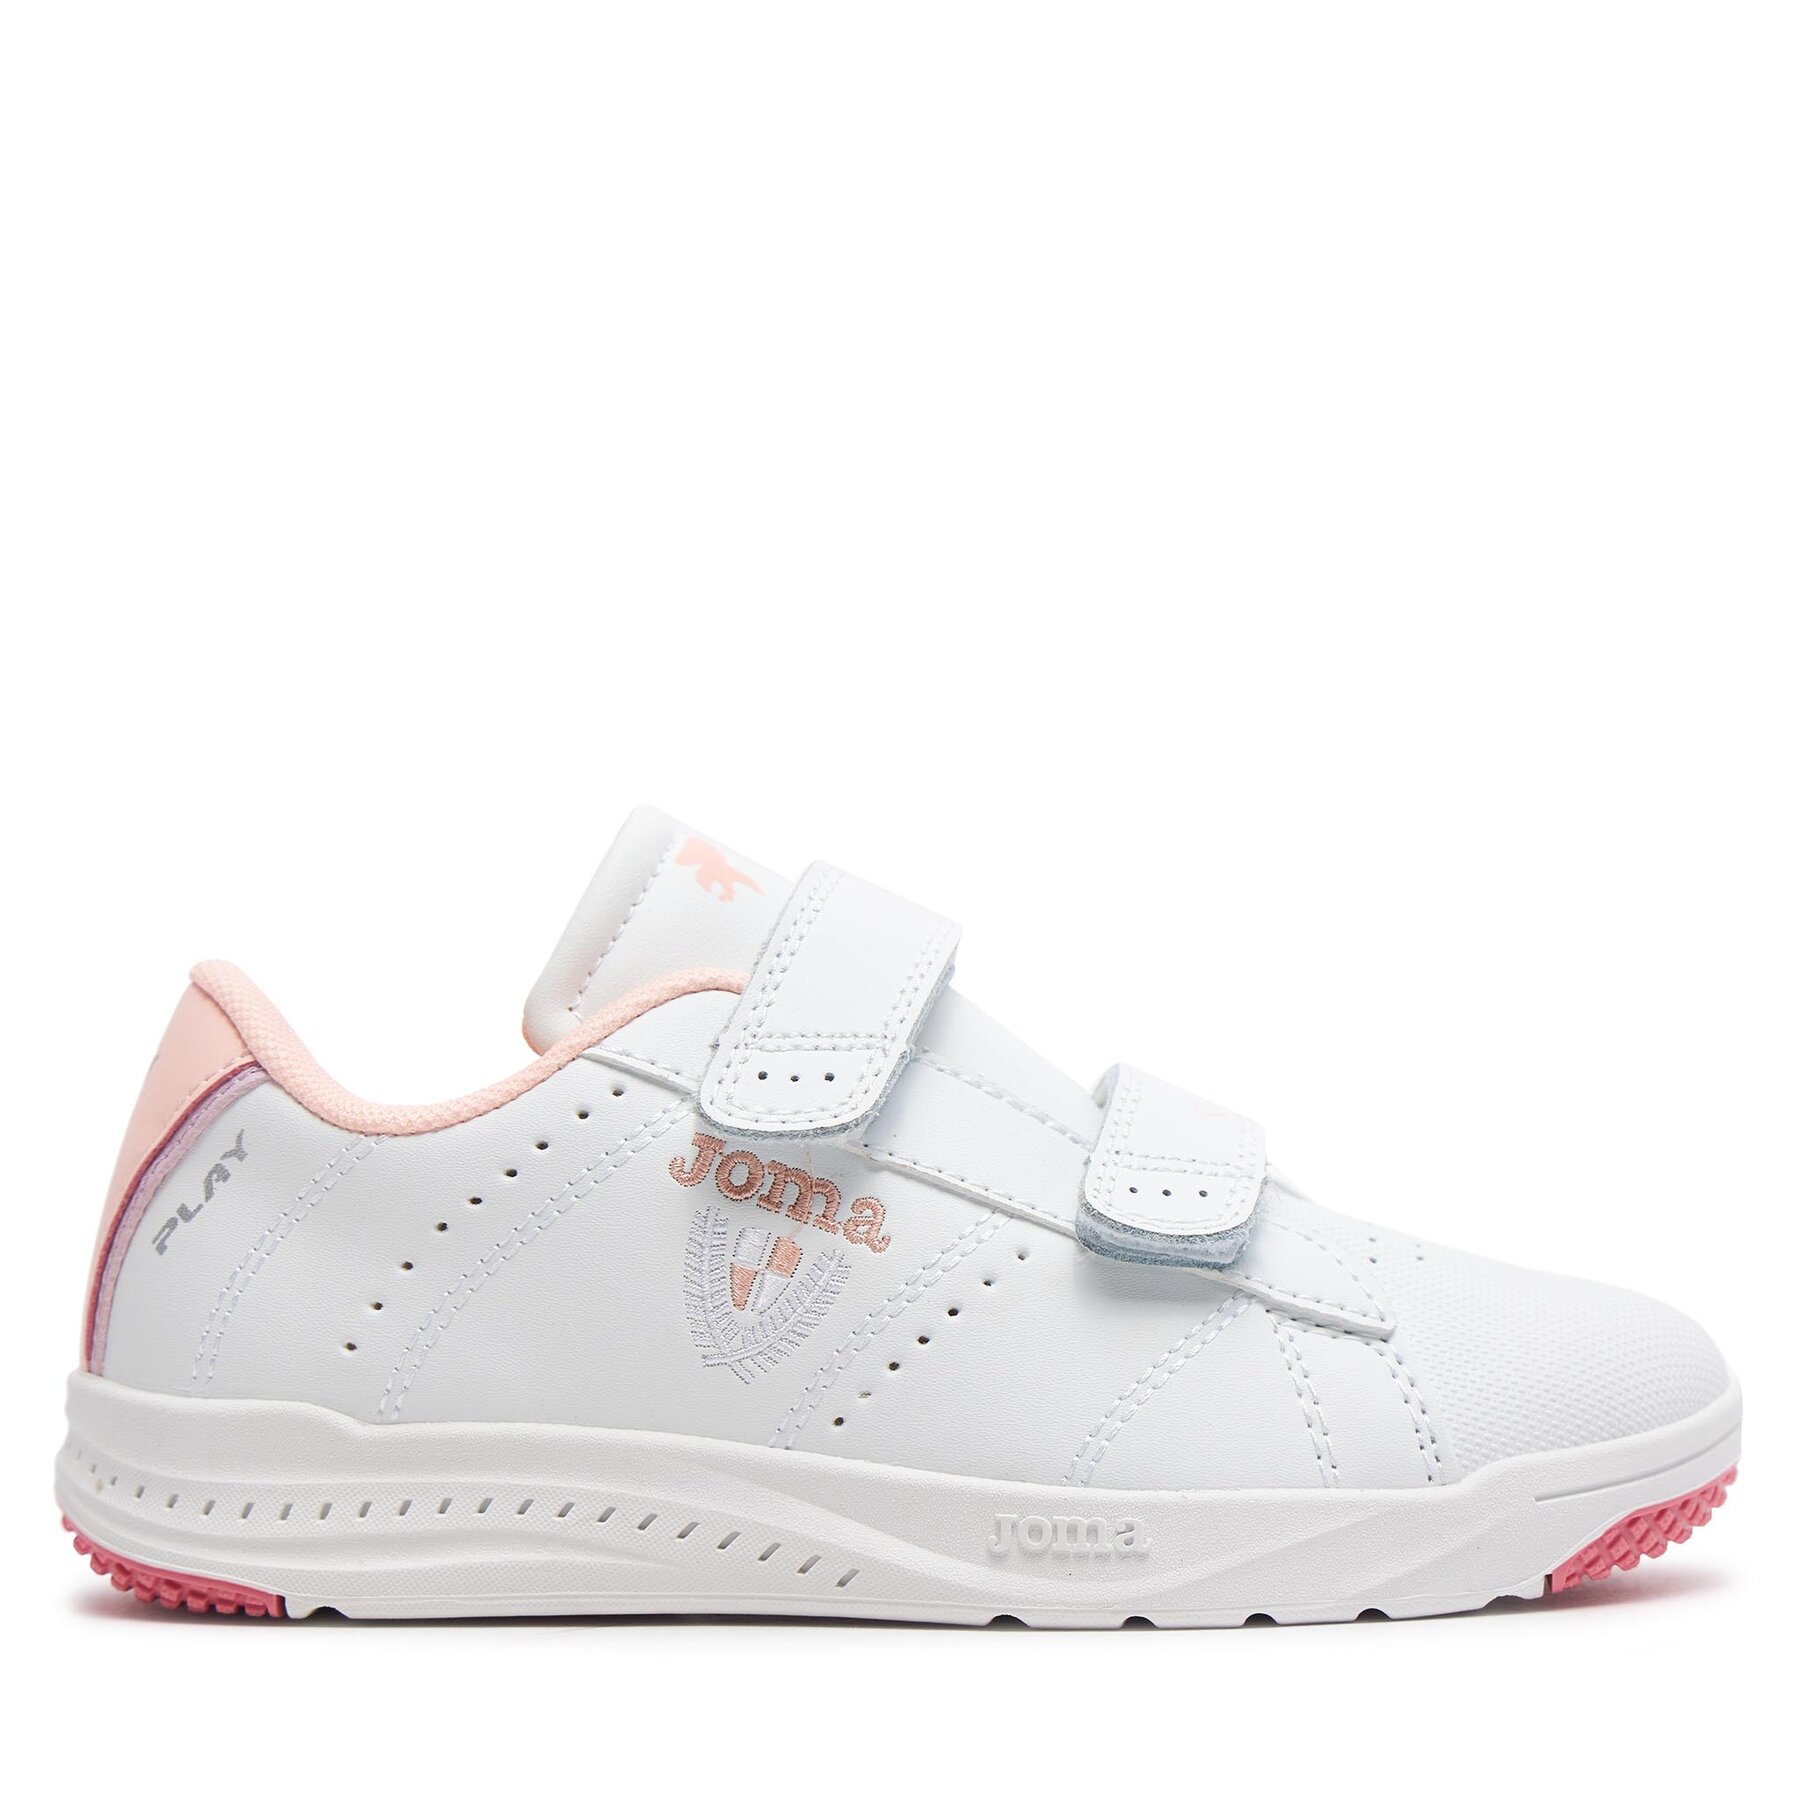 Sneakers Joma W.Play Jr 2329 WPLAYW2329V White Pink von Joma